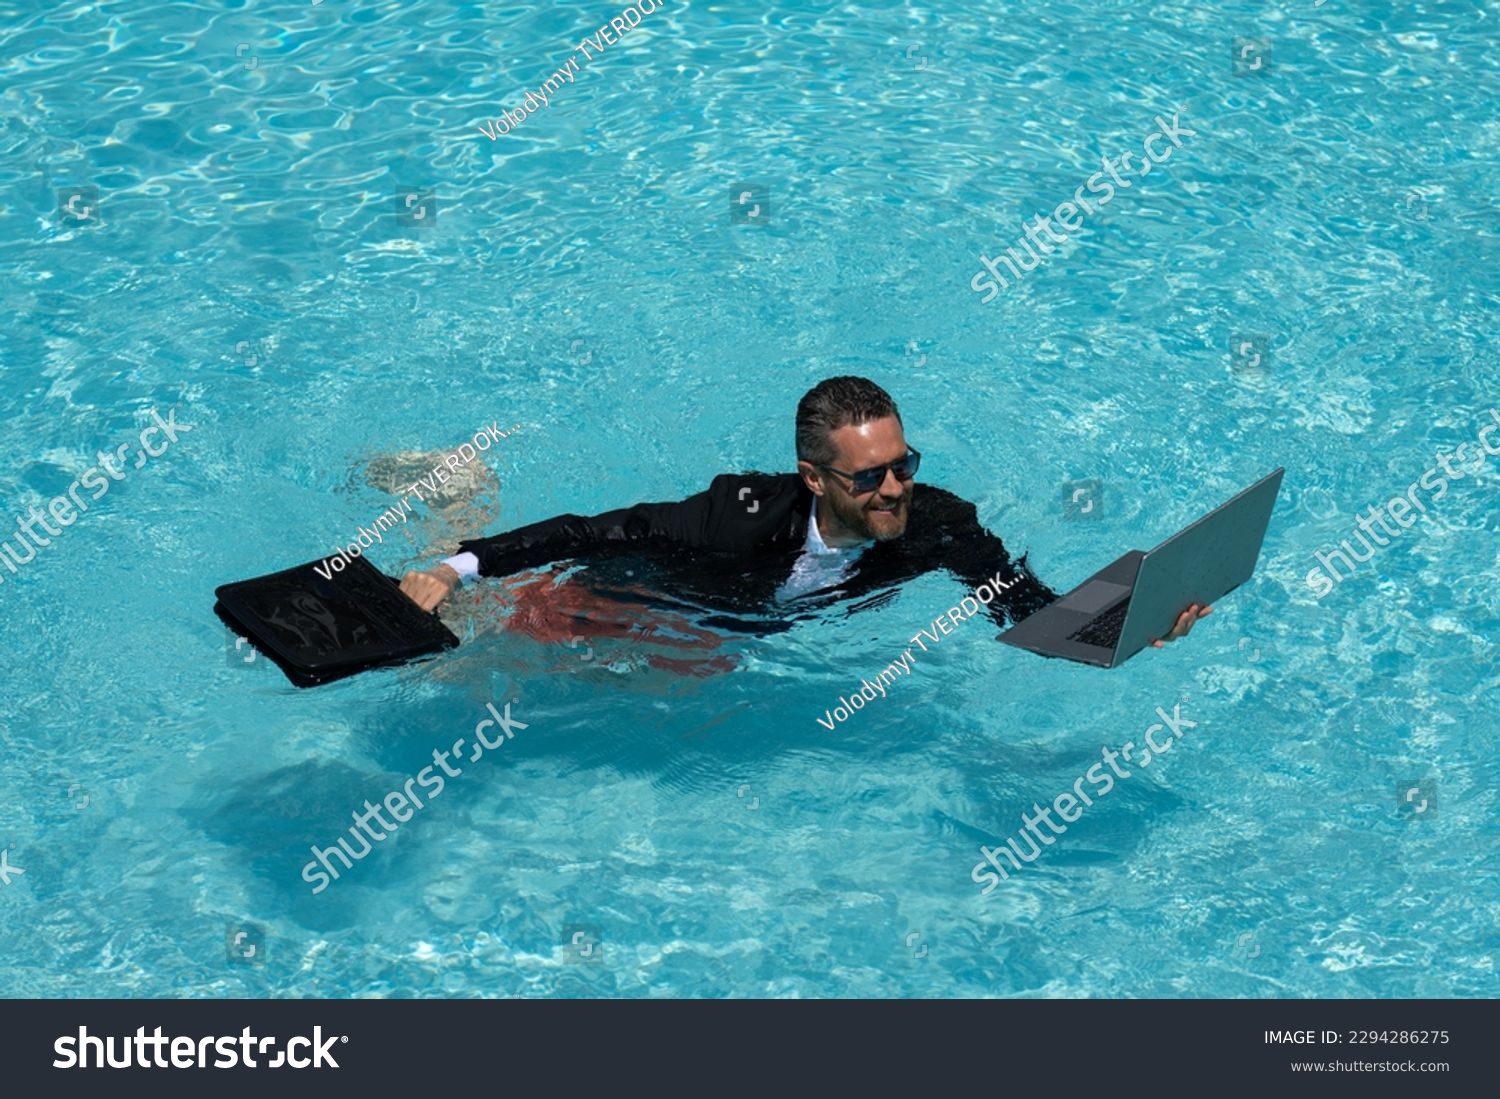 Businessman in suit with laptop in swimming pool. Crazy business man on summer vacation. Excited businessman in wet suit in swim pool. Funny business man, crazy comic business concept. Remote working. #2294286275